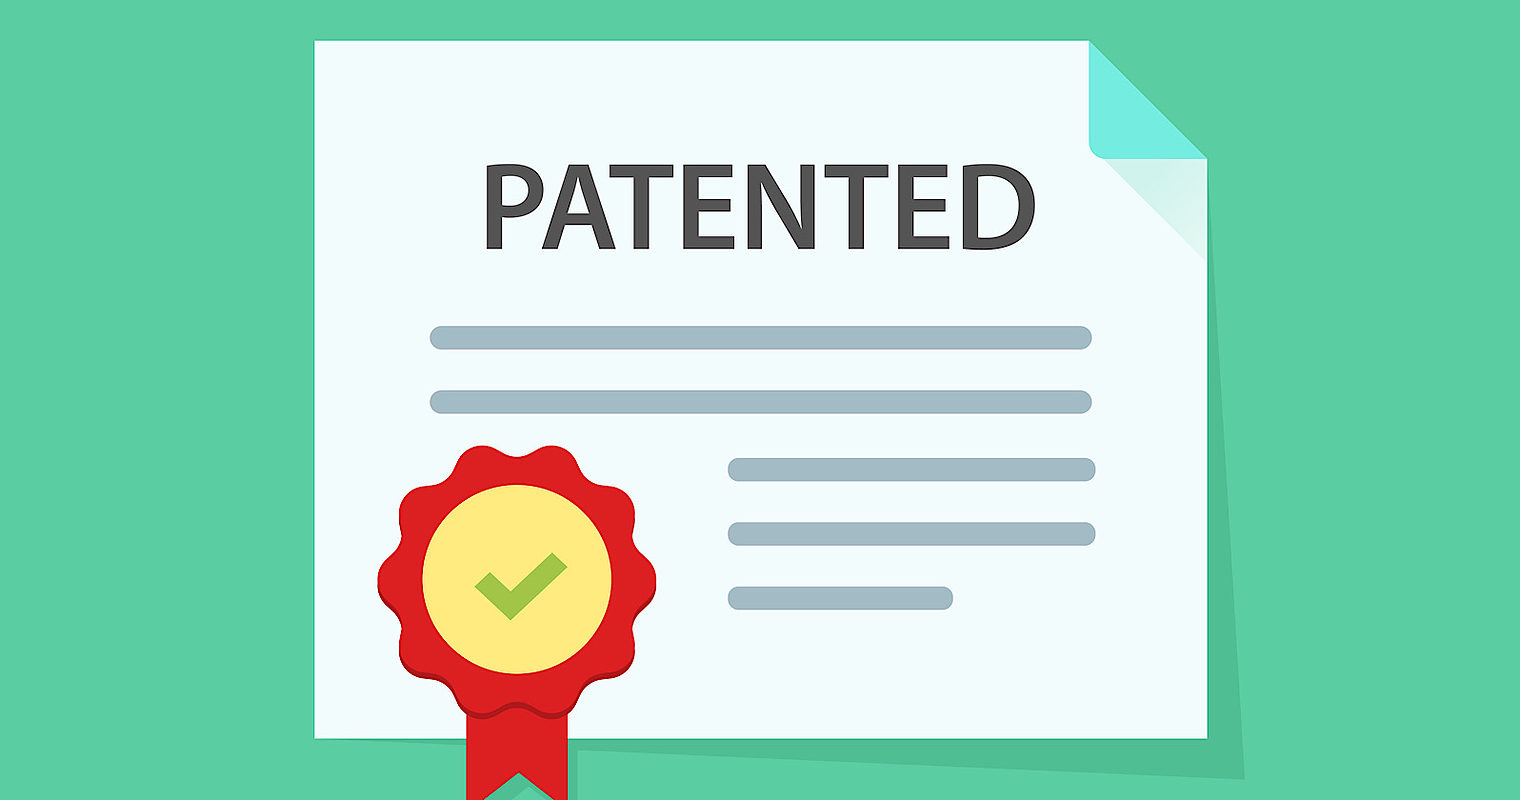 Google: Patents Are Not Always Used in Search